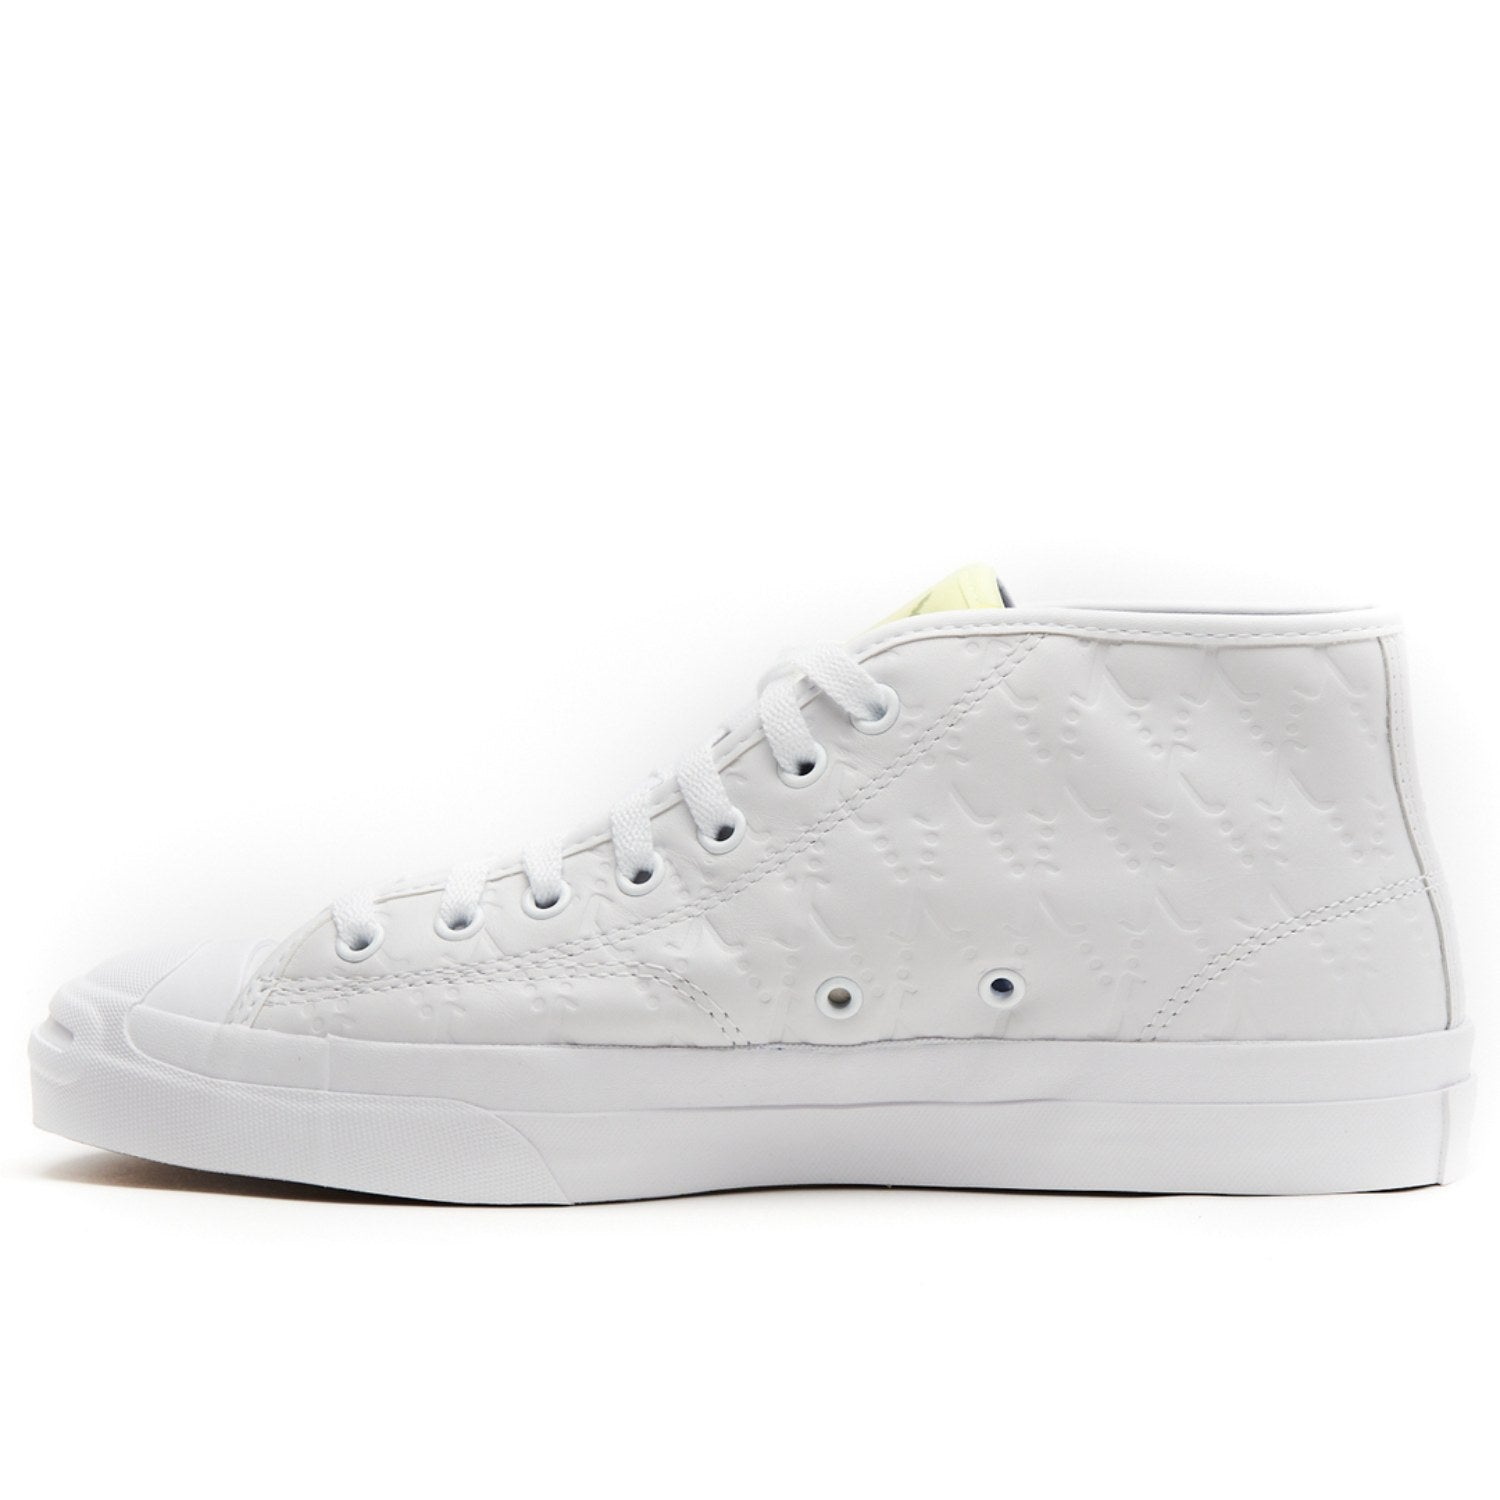 Converse JACK PURCELL PRO MID - WHITE/CHAMBRAY BLUE 170944C